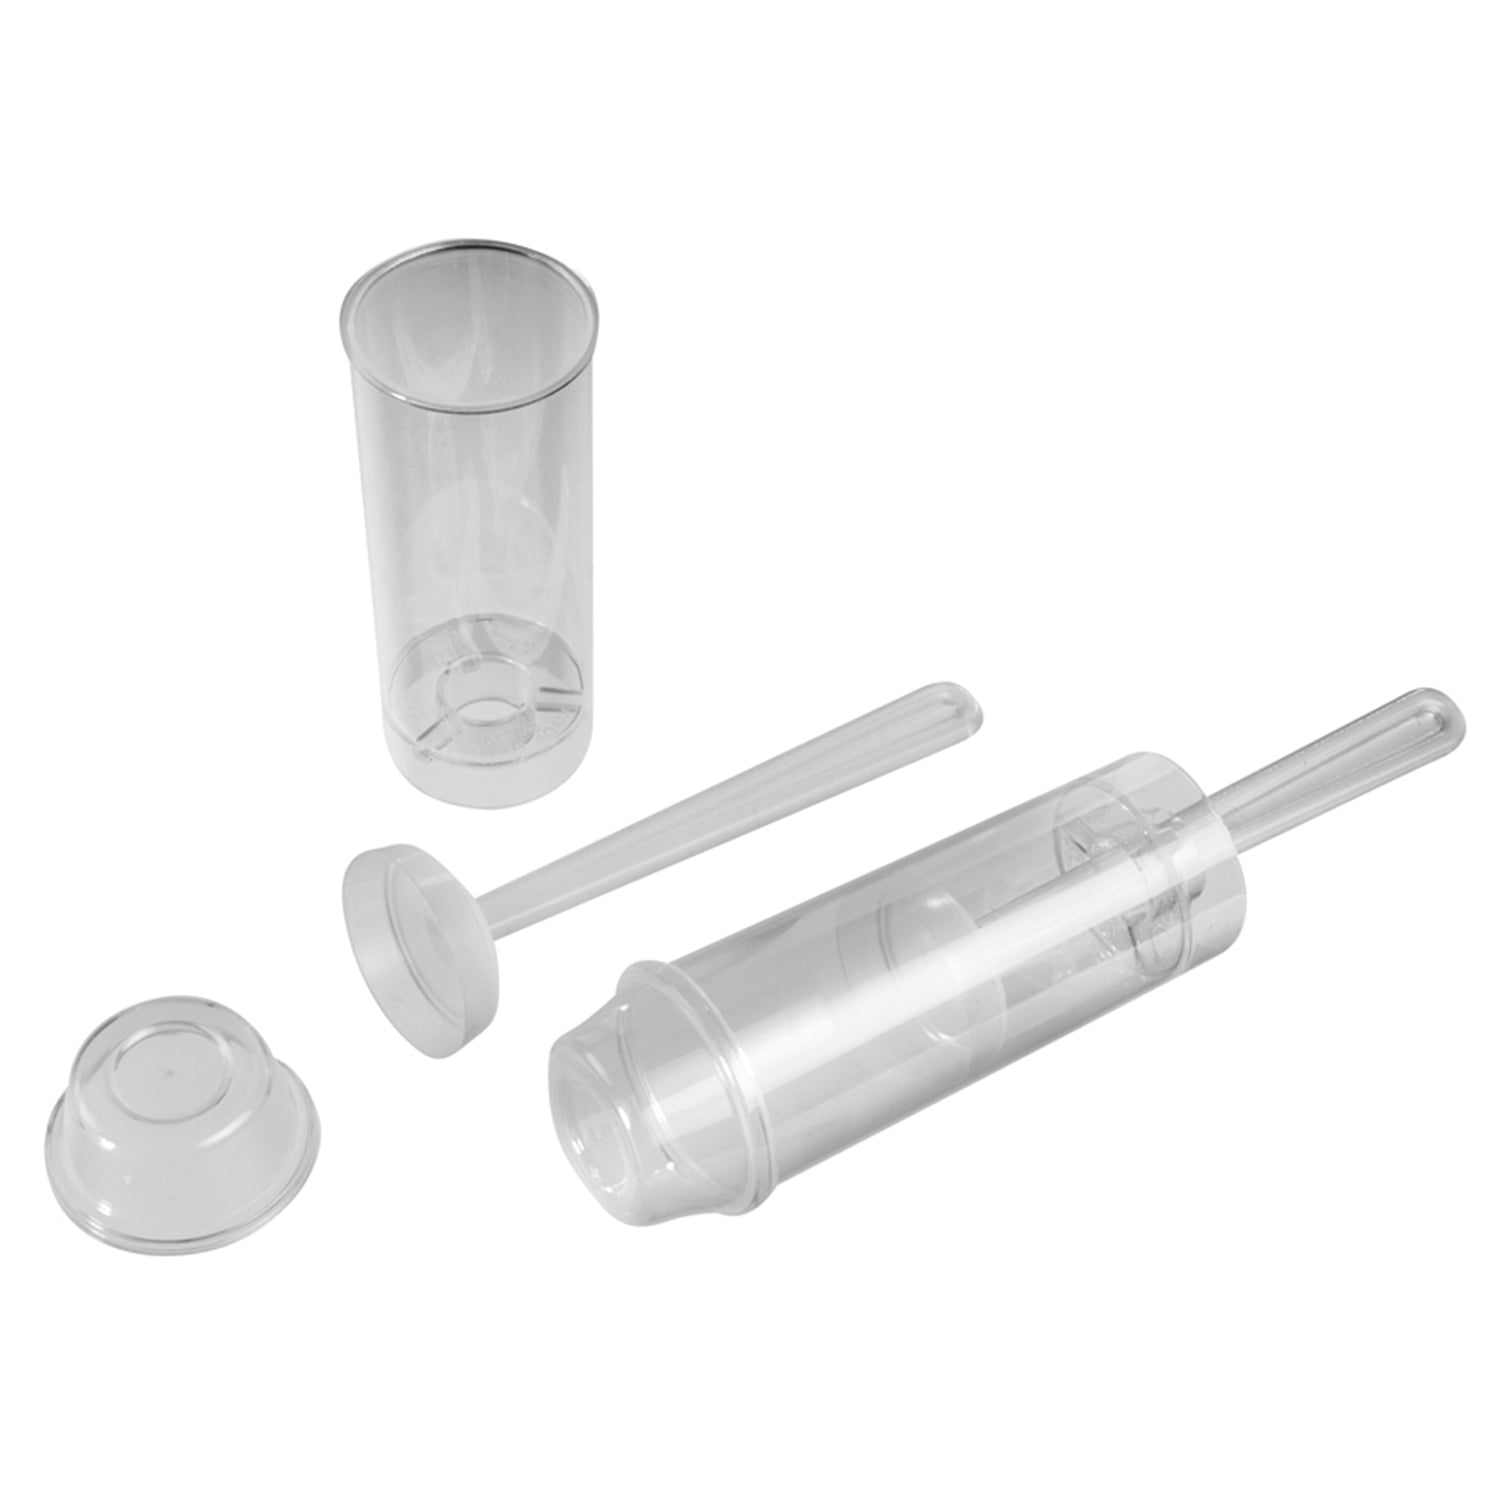 Aomily DIY 10pcs/Set Plastic Clear Push Up Pop Cake Containers Lids  Shooters Birthday Party Events Favors Kids Gift Brinquedos - AliExpress